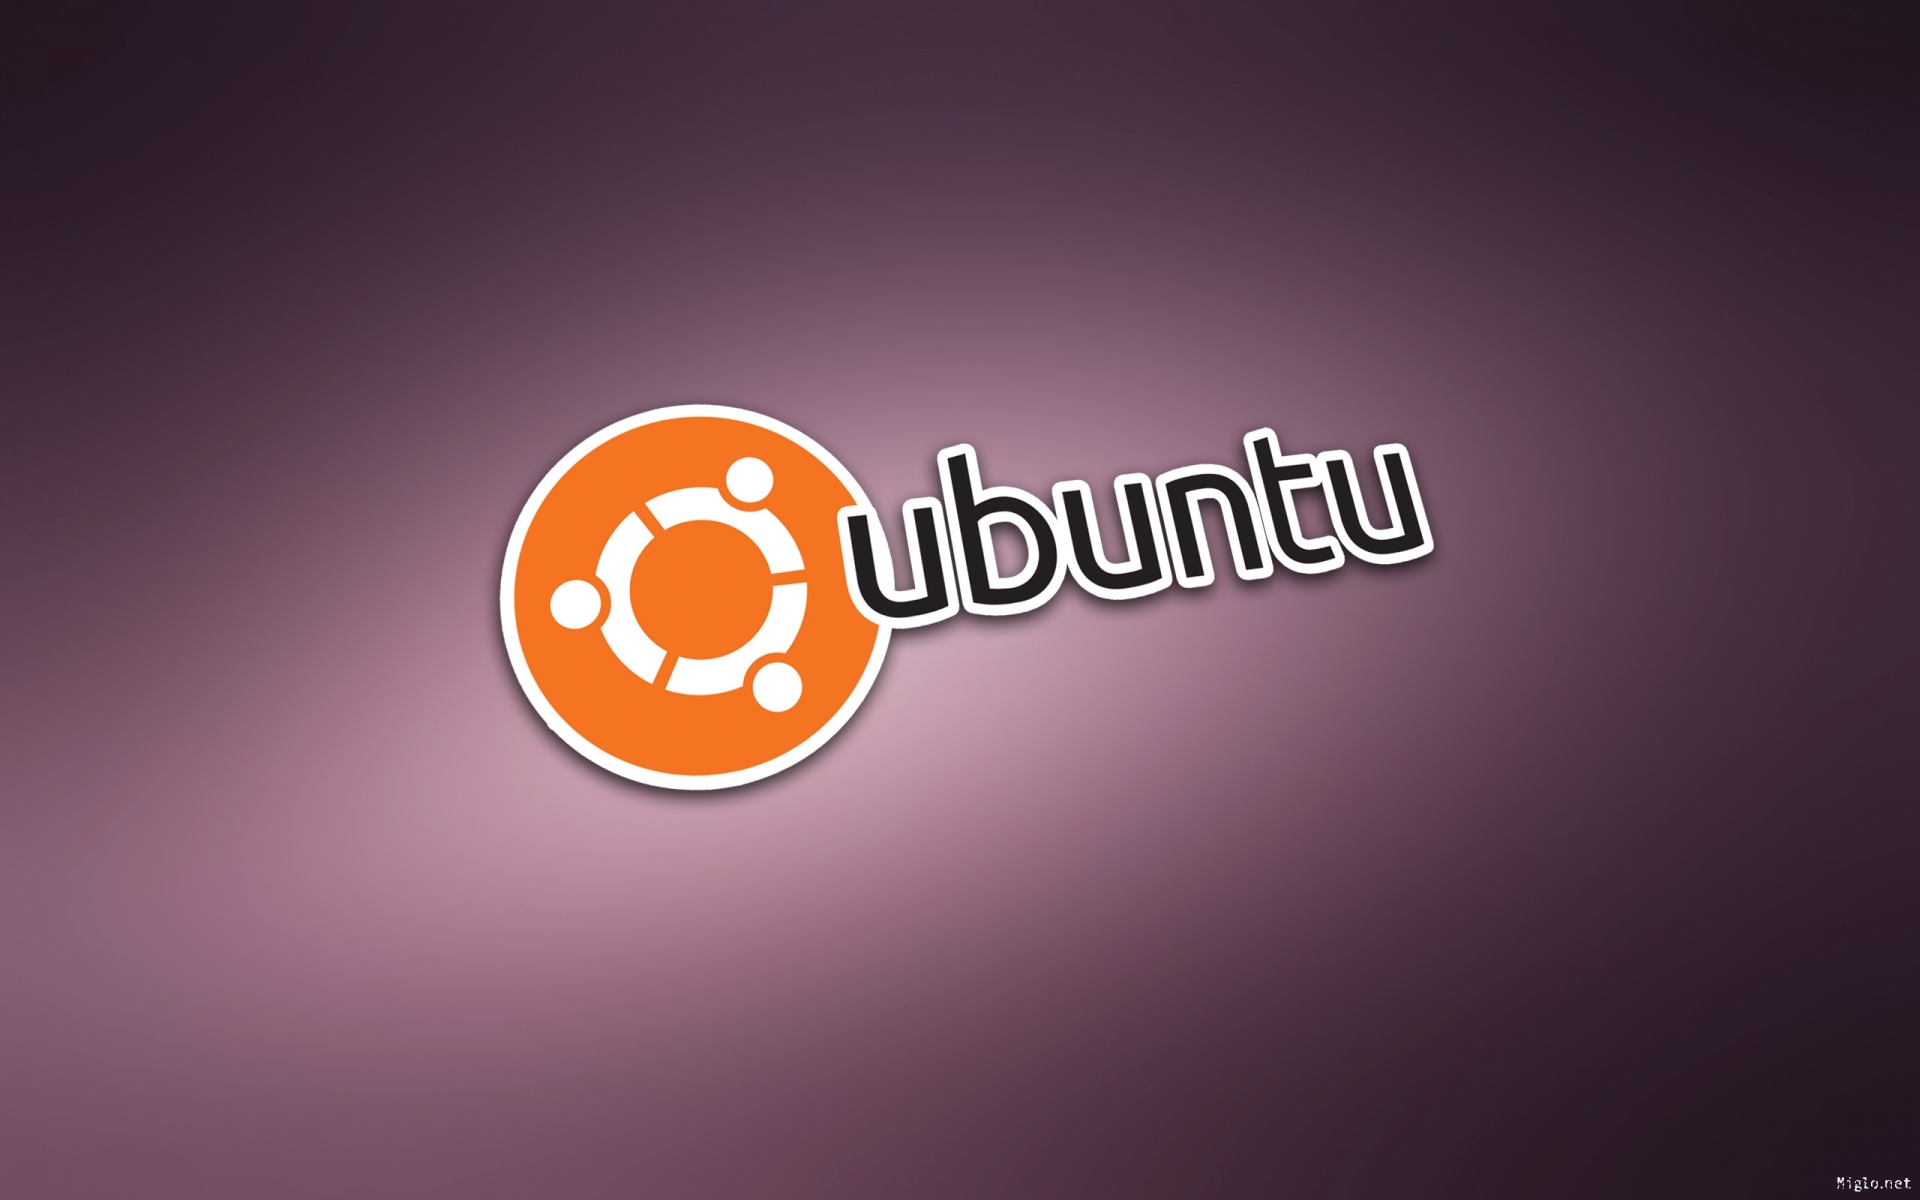 Some Of The Best Ubuntu Wallpaper Are Presented Here With Eye